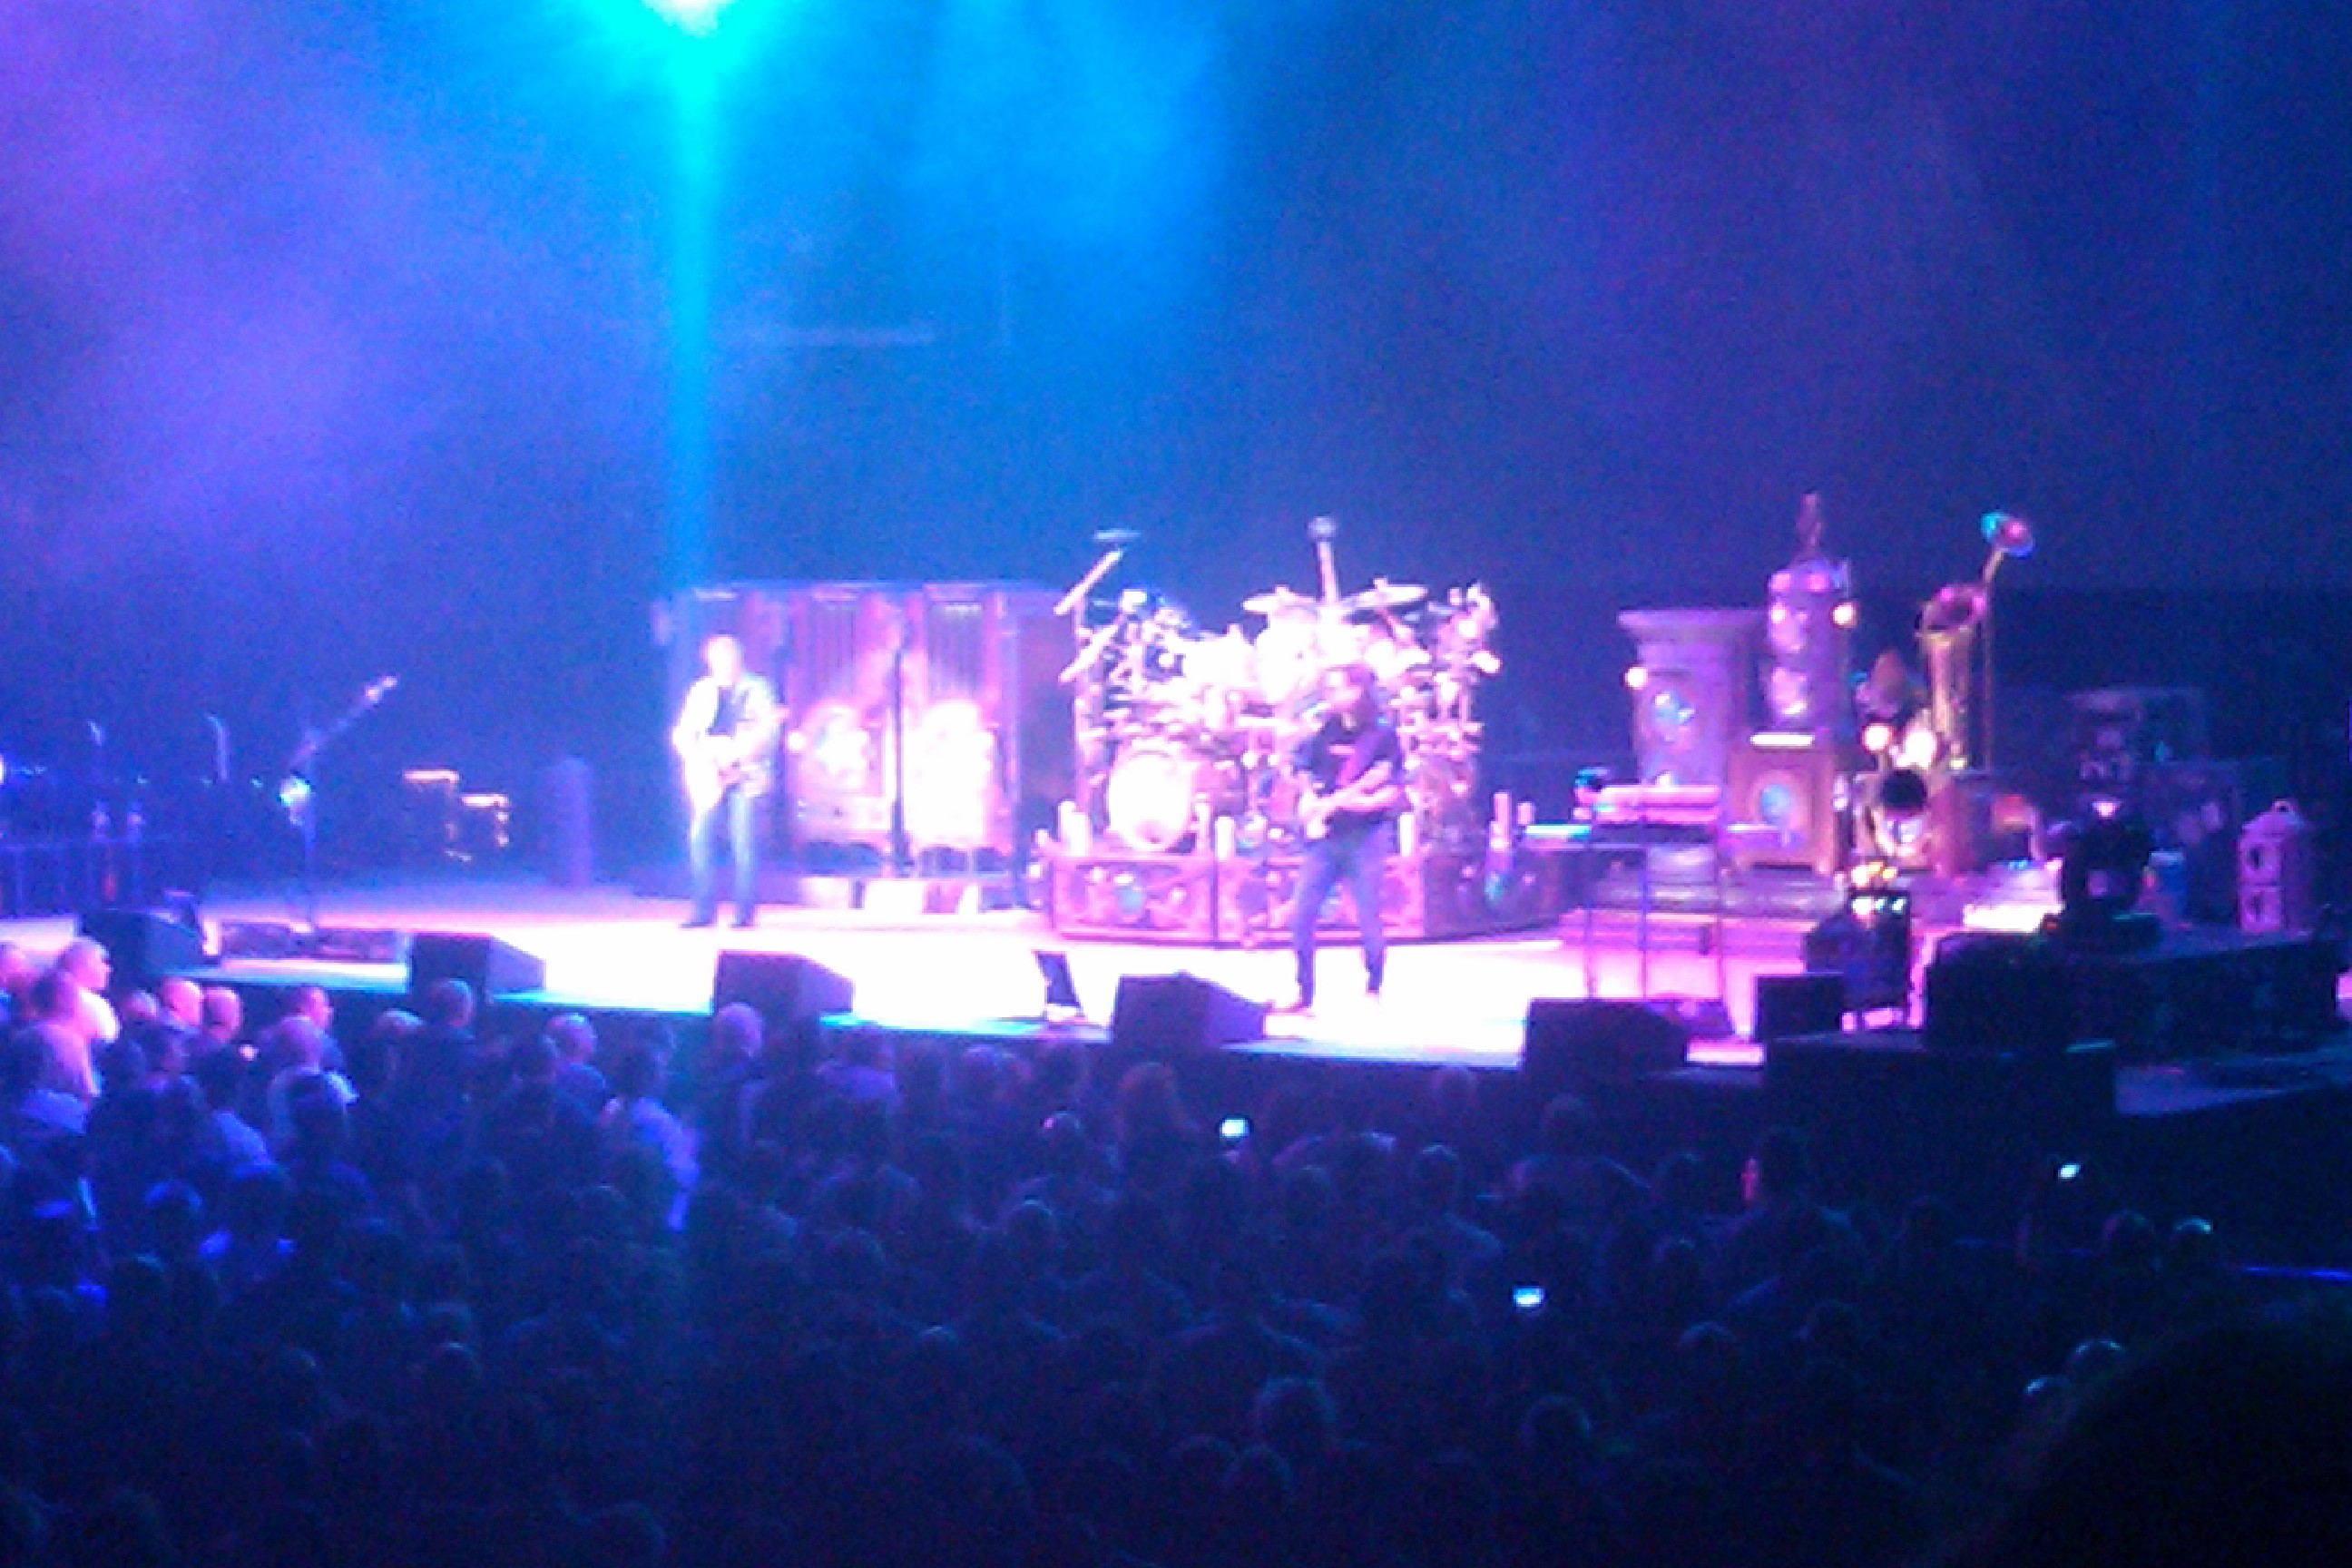 Rush in full flight 19/5/11 - all 7 women inside arena just out of shot